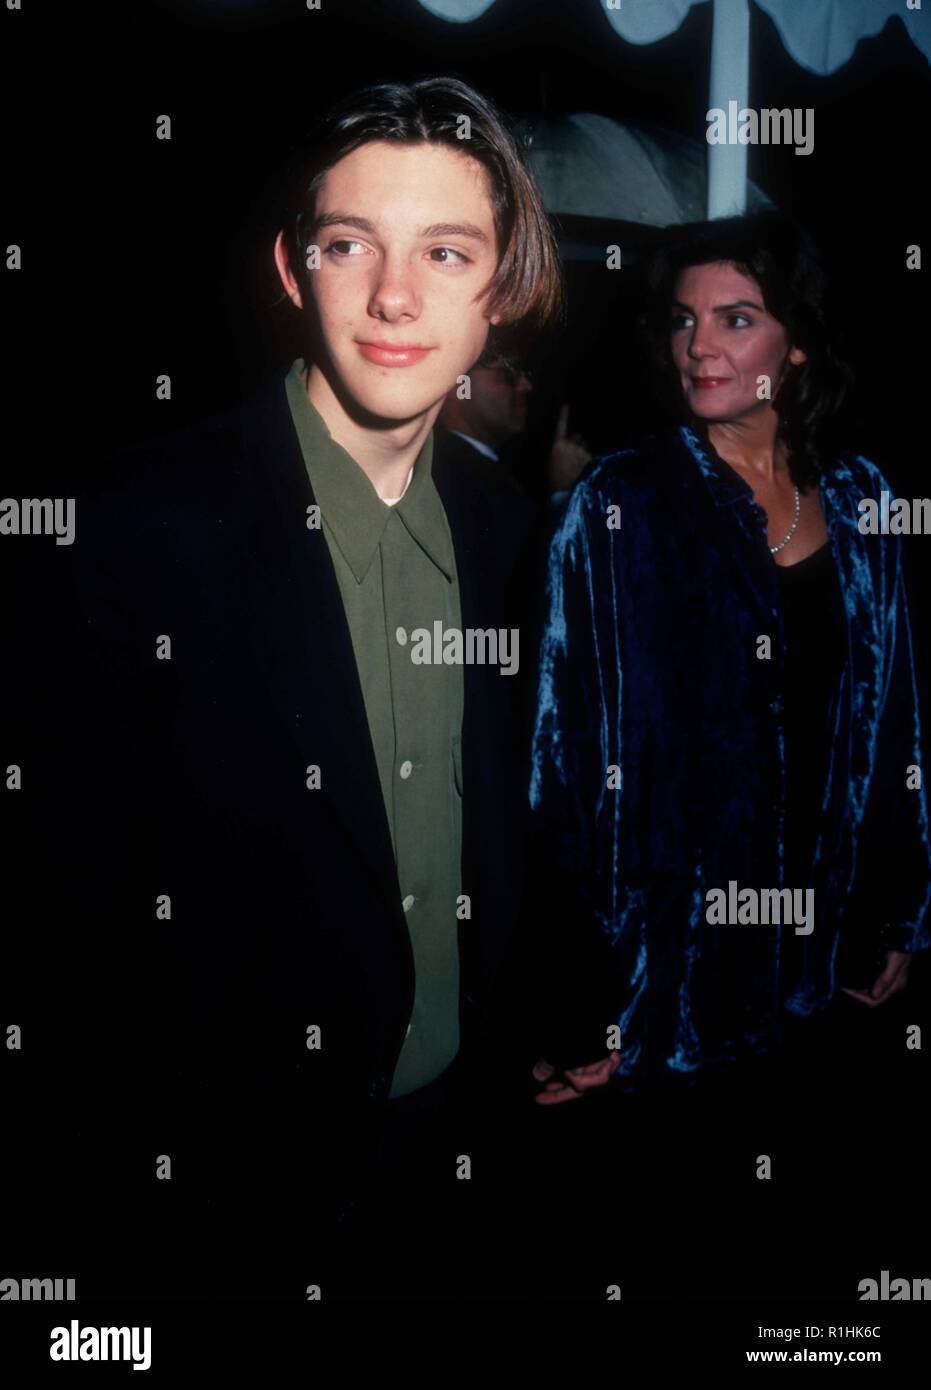 BEVERLY HILLS, CA - DECEMBER 17: Actor Lukas Haas attends the 'Leap Of Faith' Beverly Hills Premiere on December 17, 1992 at the Samuel Goldwyn Theatre in Beverly Hills, California. Photo by Barry King/Alamy Stock Photo Stock Photo